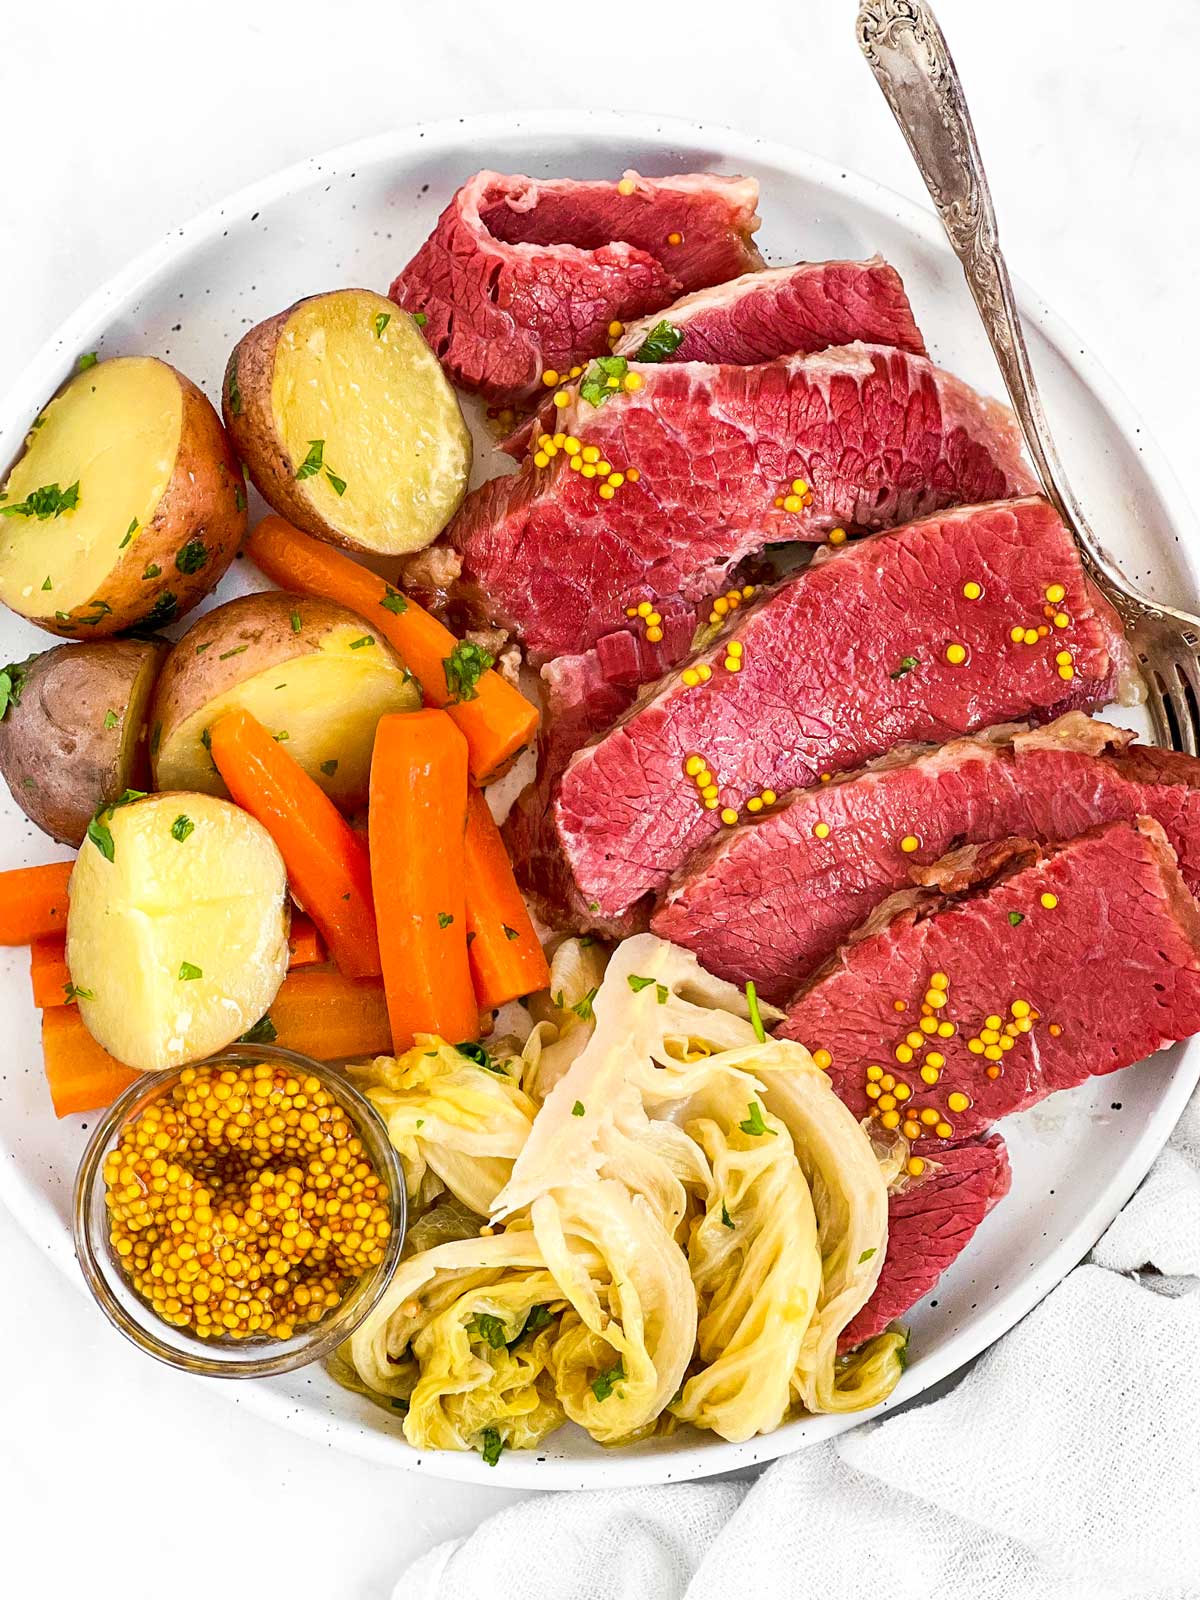 corned beef and boiled vegetables on plate with a fork